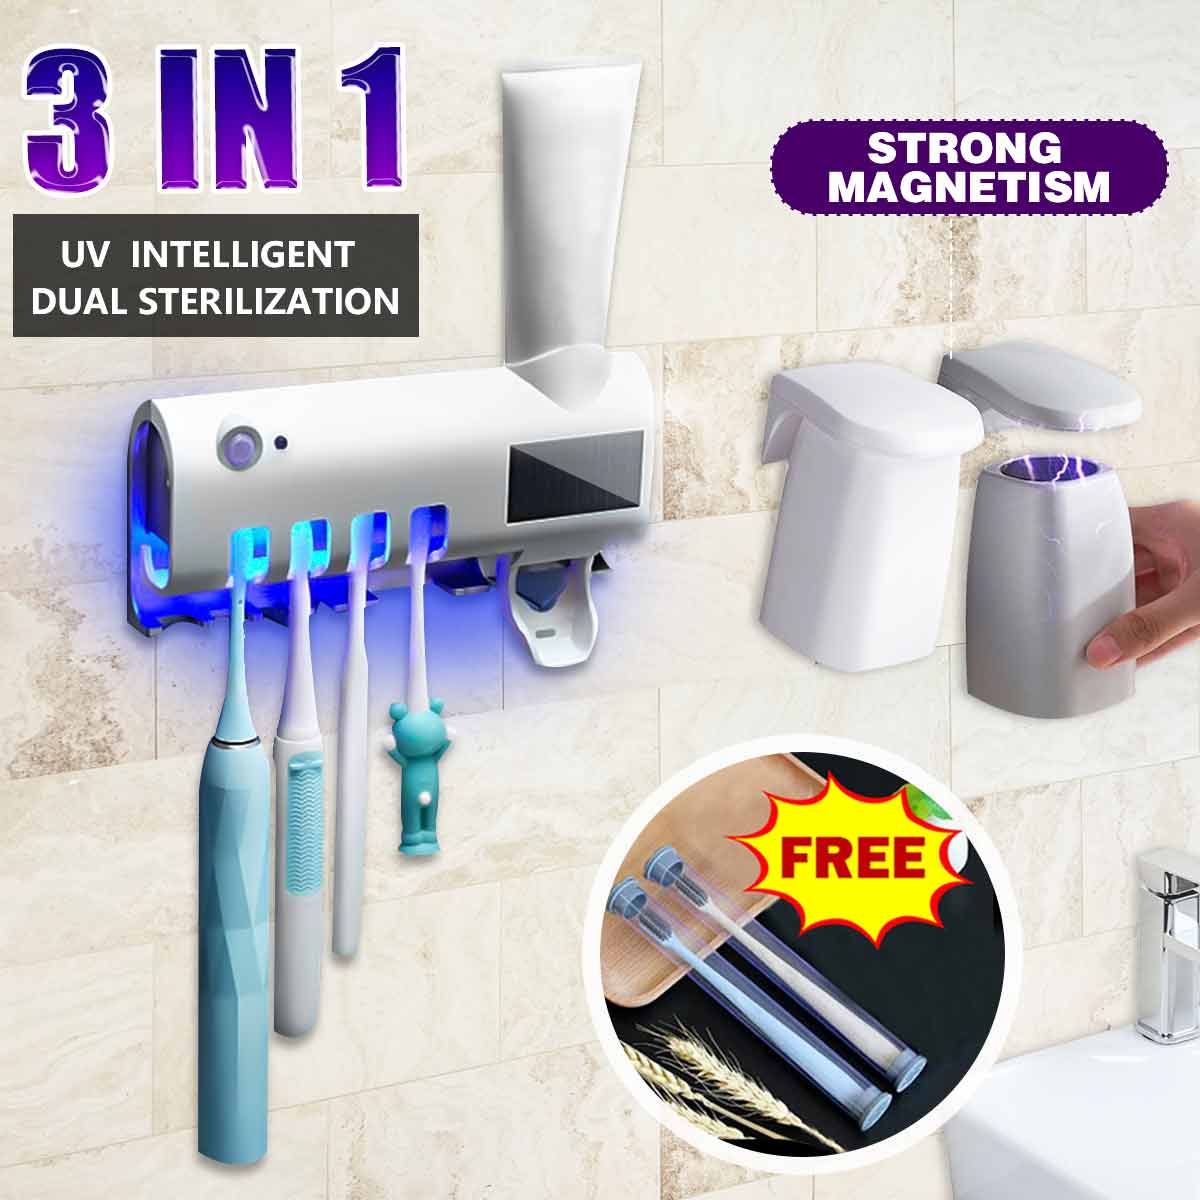 Solar-Charging-Infrared-Toothbrush-Sterilizer-Holder-Automatic-Toothpaste-Dispenser-Magnetic-Suction-1622988-1